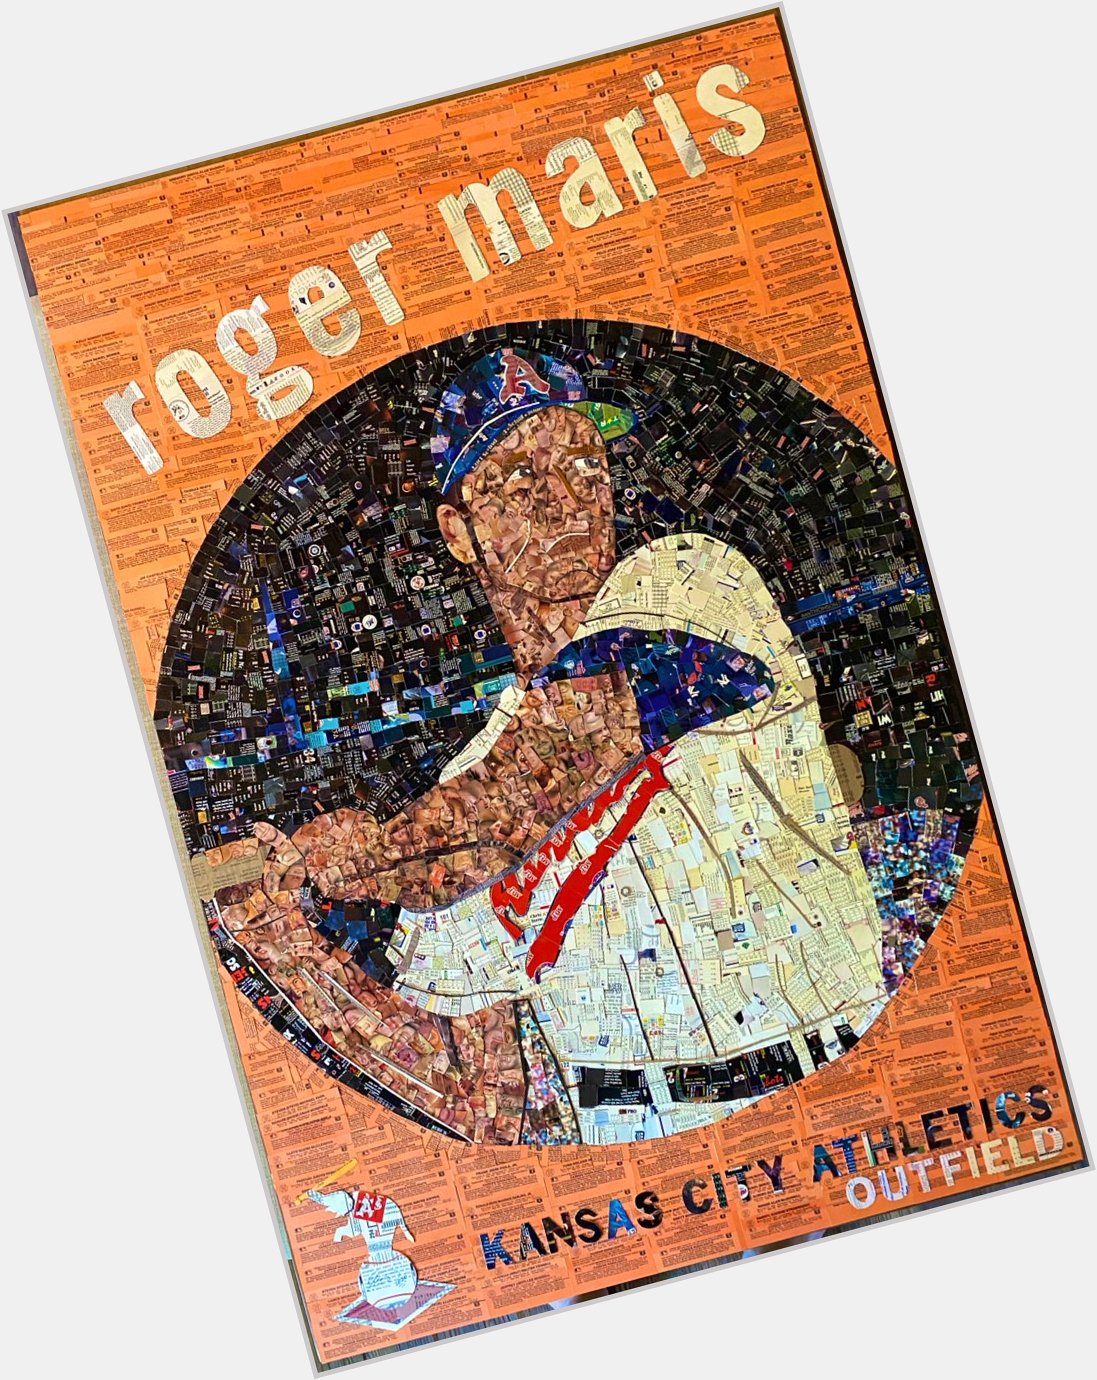 Happy birthday Roger Maris! Here s my tribute, rendered in cut baseball cards  